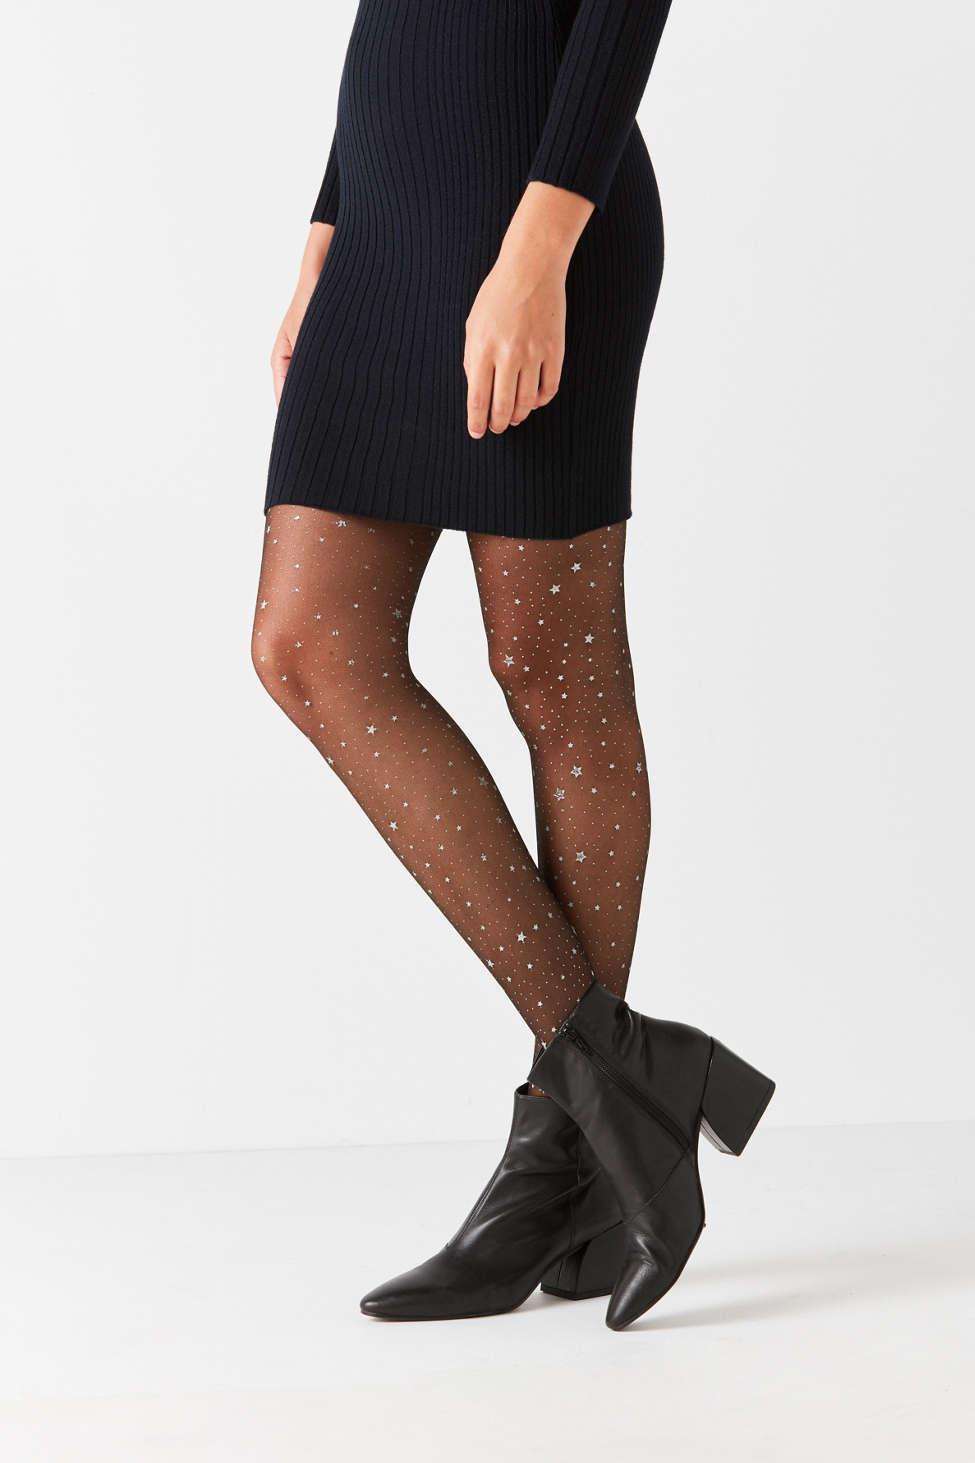 GLITTER BLACK Details about   NEW Themed   Miscellaneous PANTYHOSE M